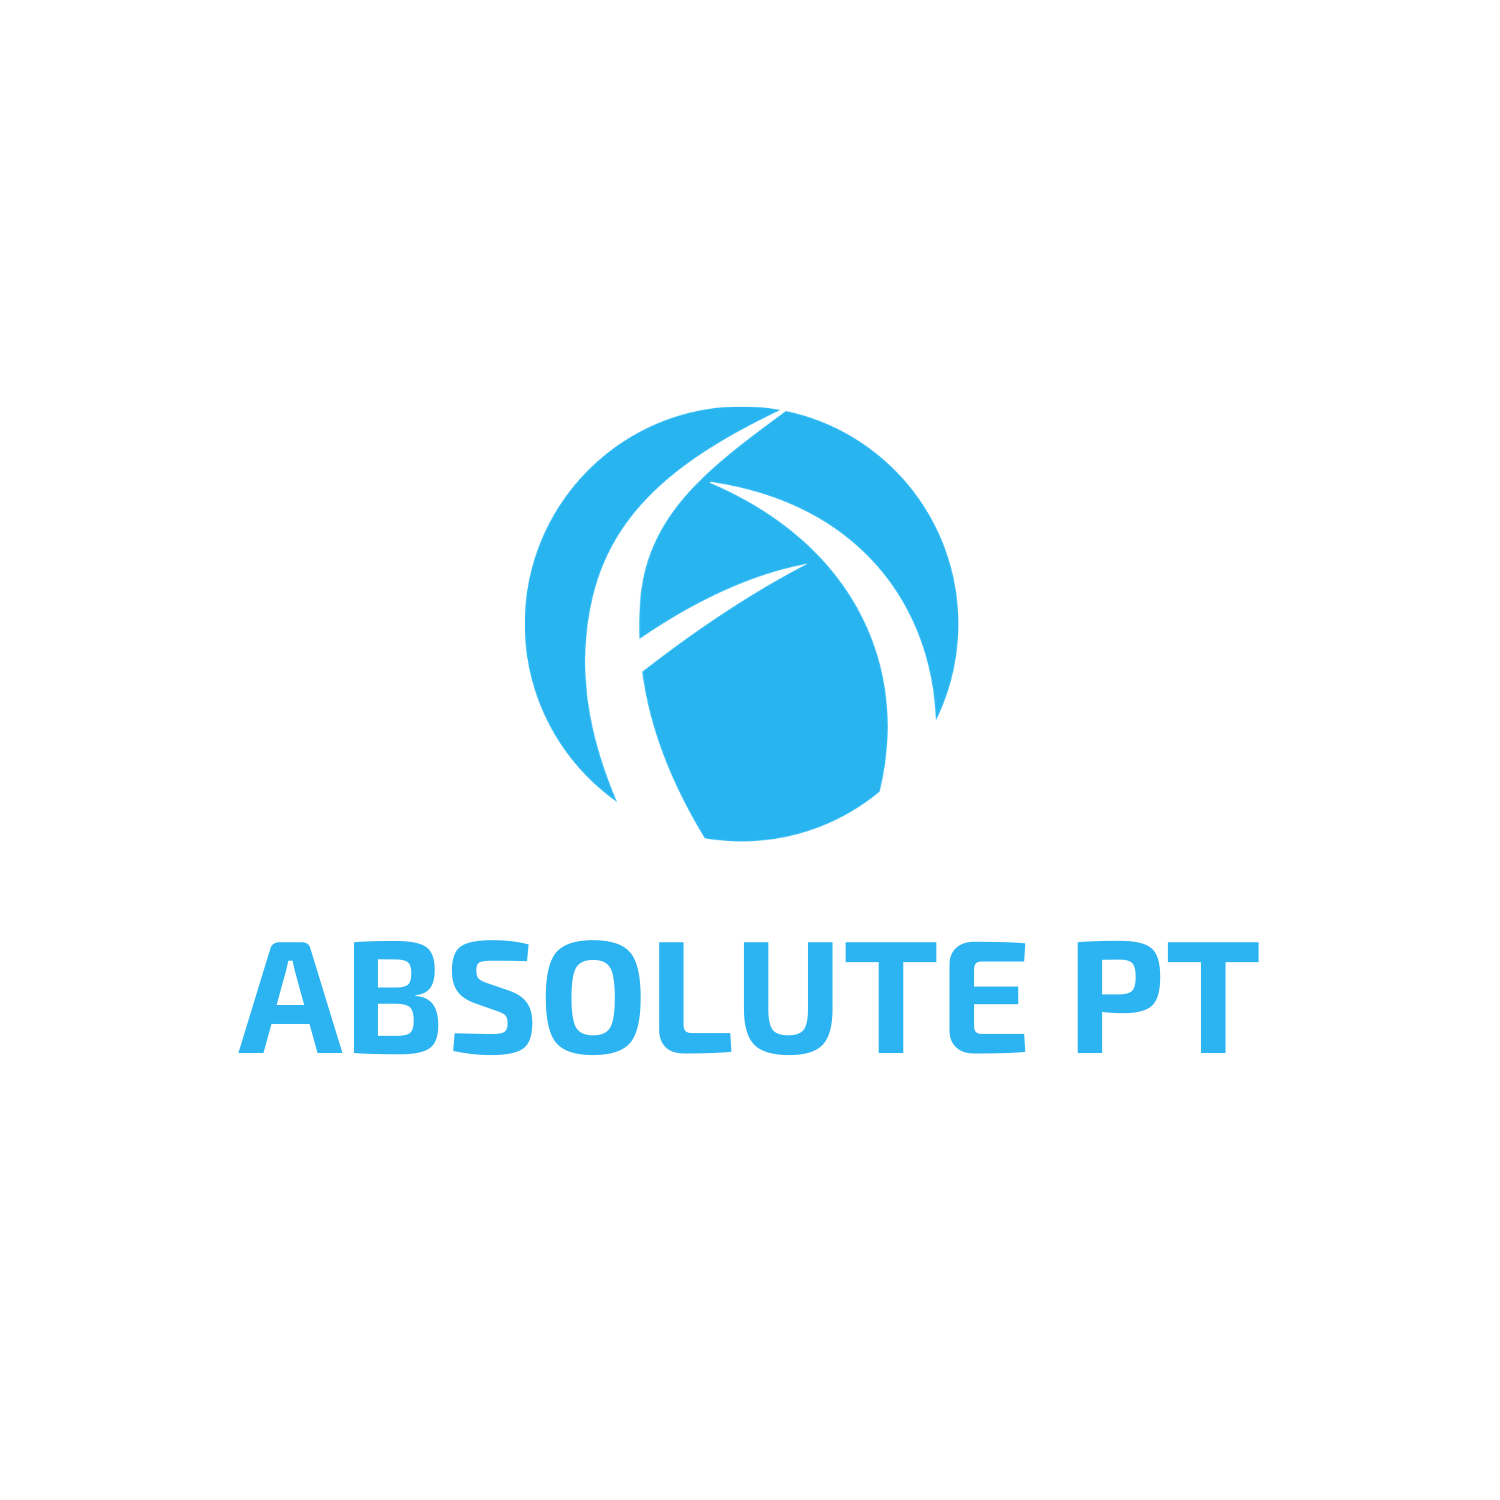 Personal Training - Absolute PT in Orchard Park NY